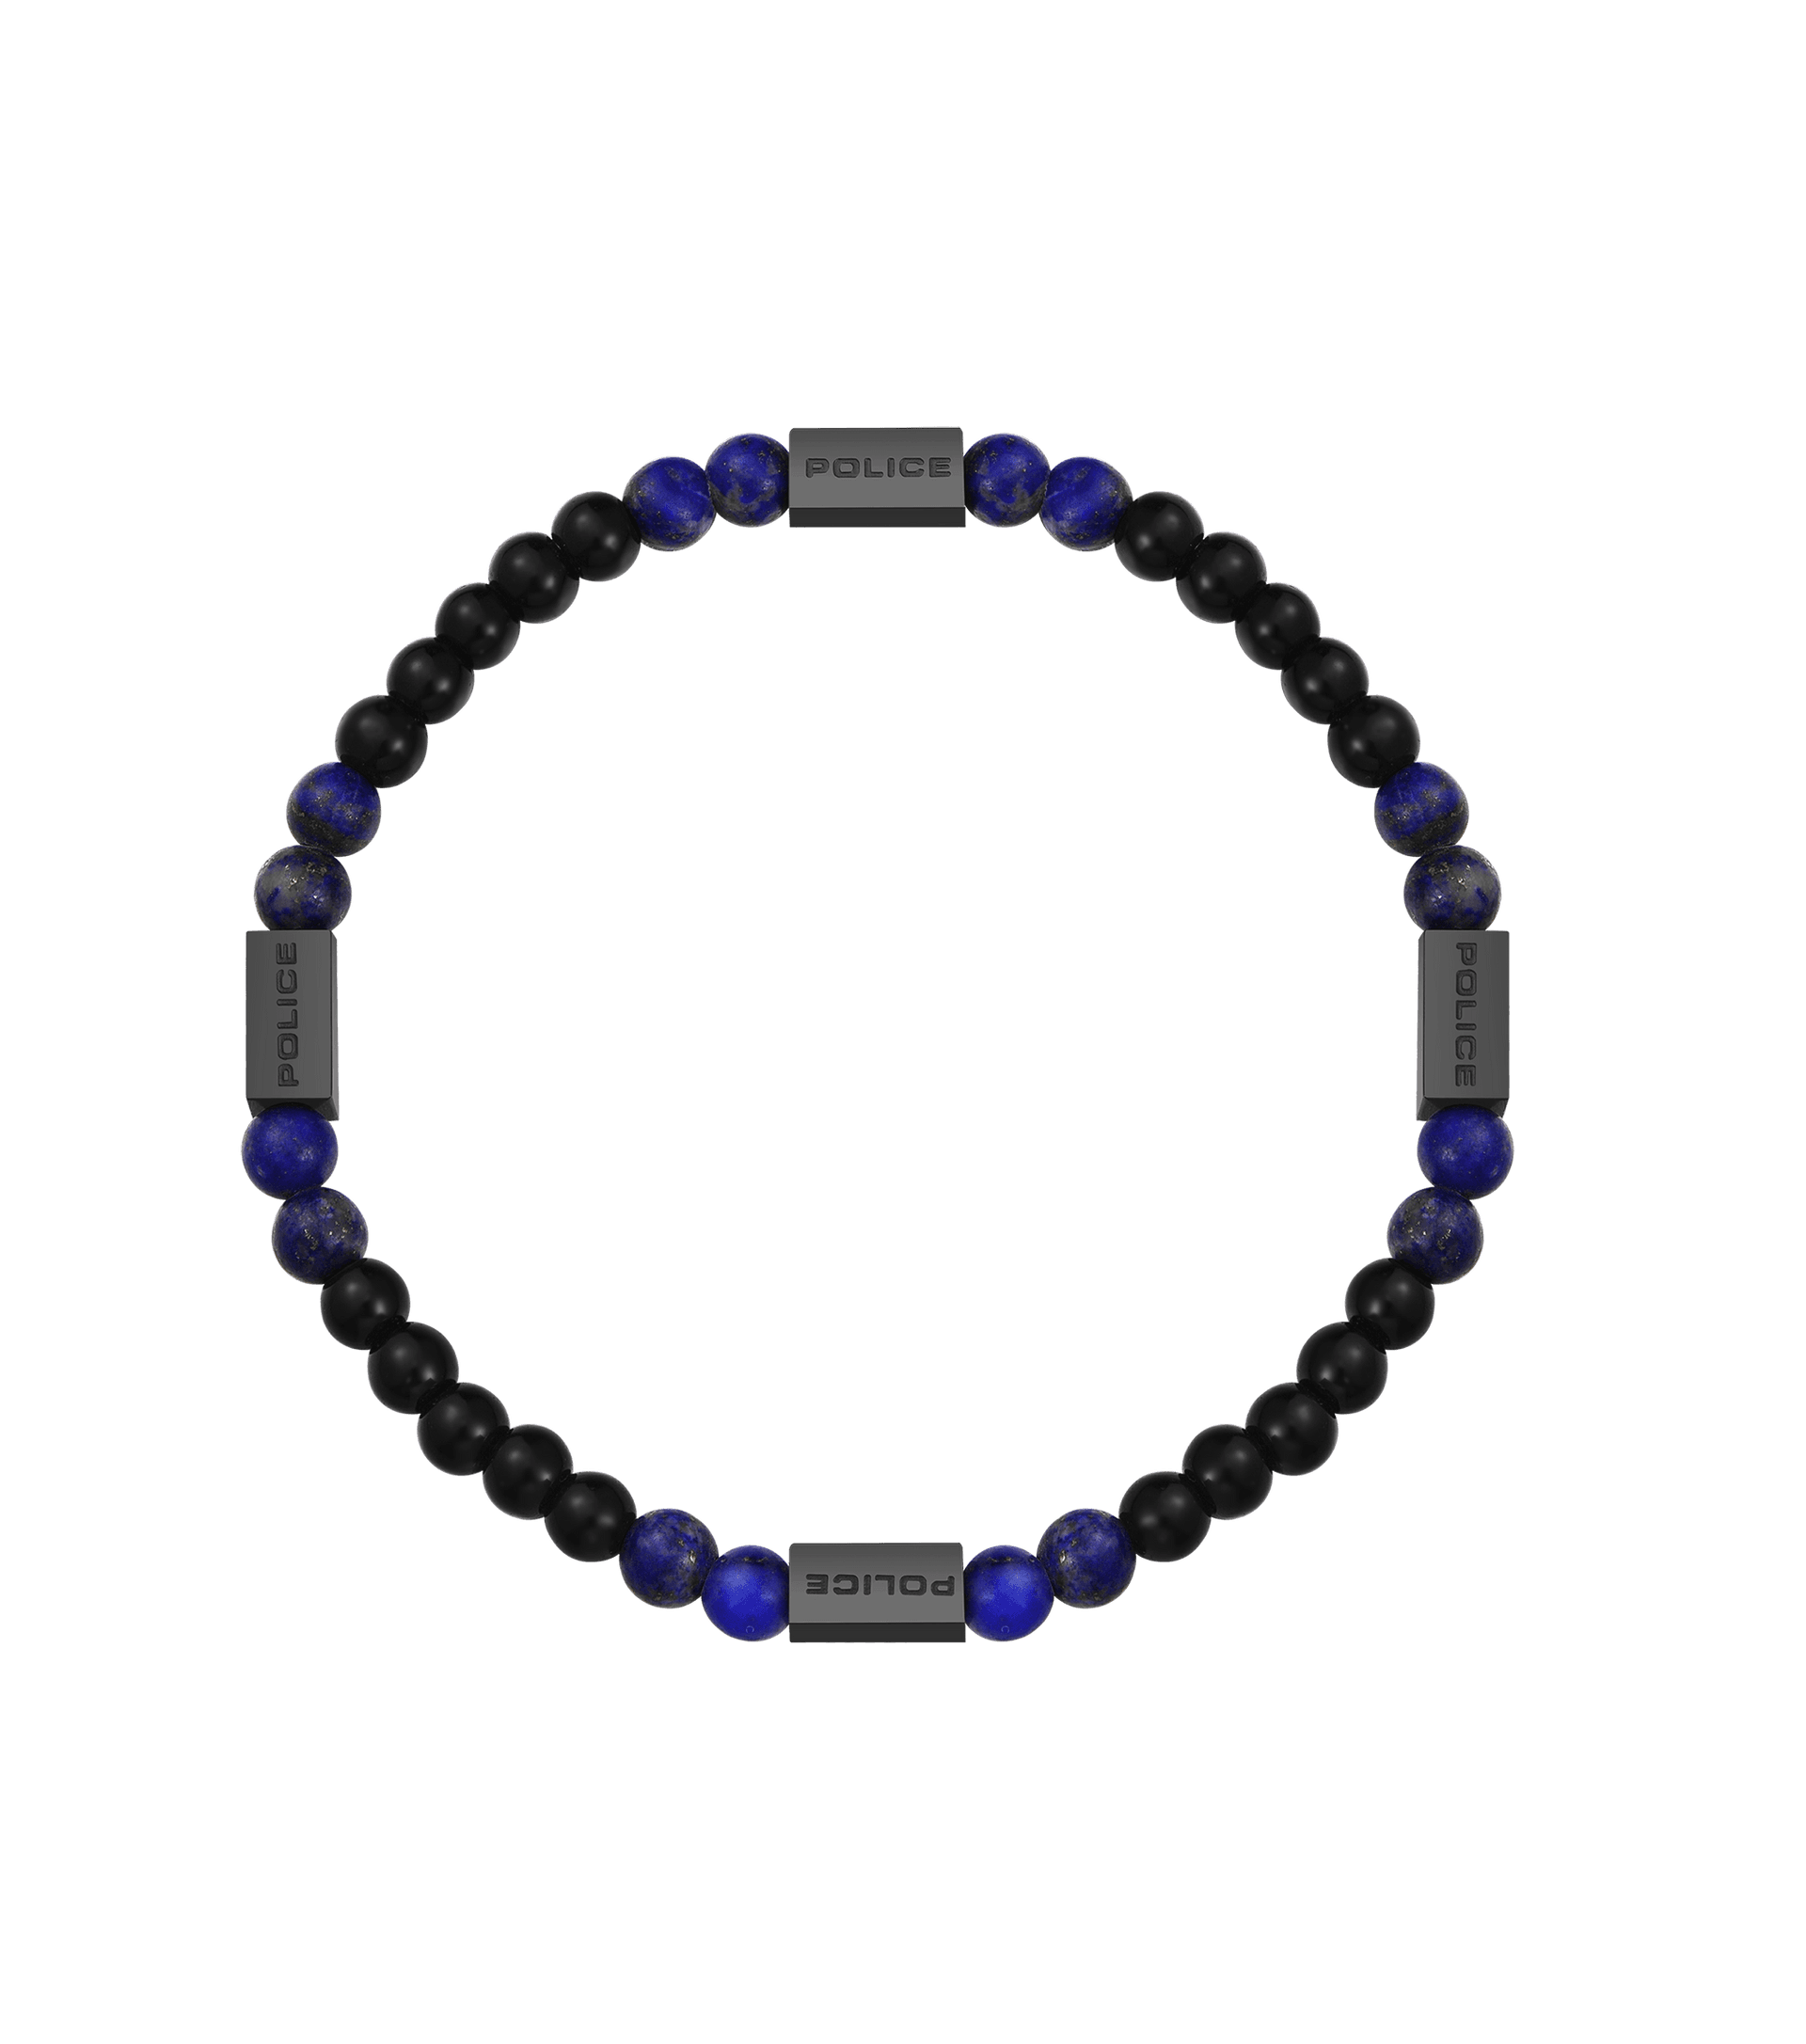 Police Urban jewels Men By Texture For Bracelet - PEAGB0001104 Police